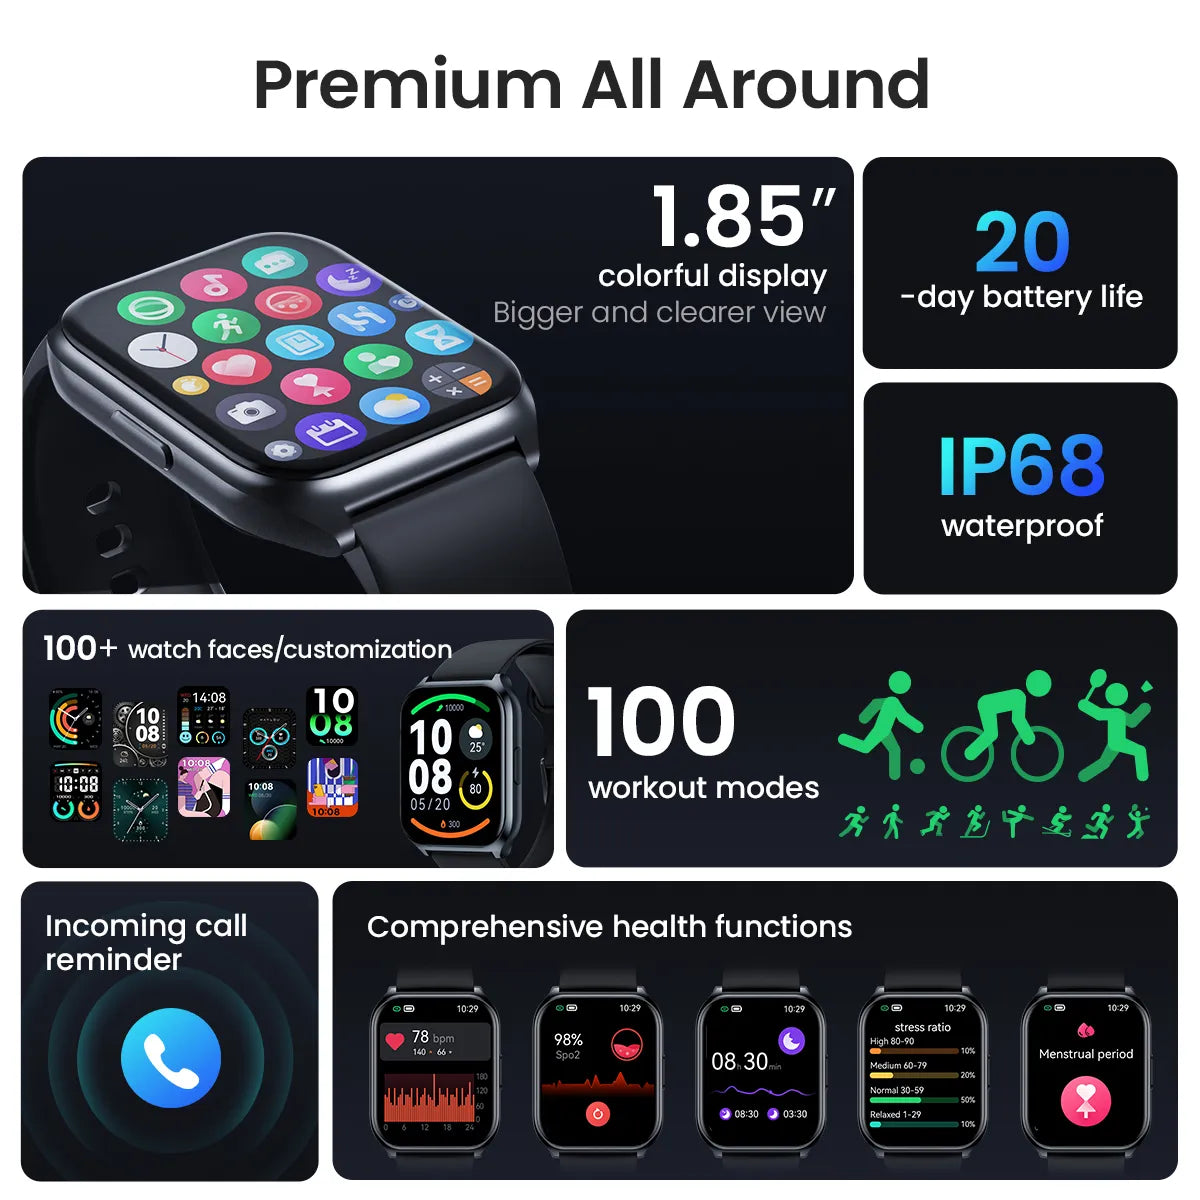 HAYLOU Watch 2 Pro (LS02 Pro) Smart Watch 1.85inch Large Display 100 Workout Modes Smartwatch Heart Rate Blood Oxygen Monitoring